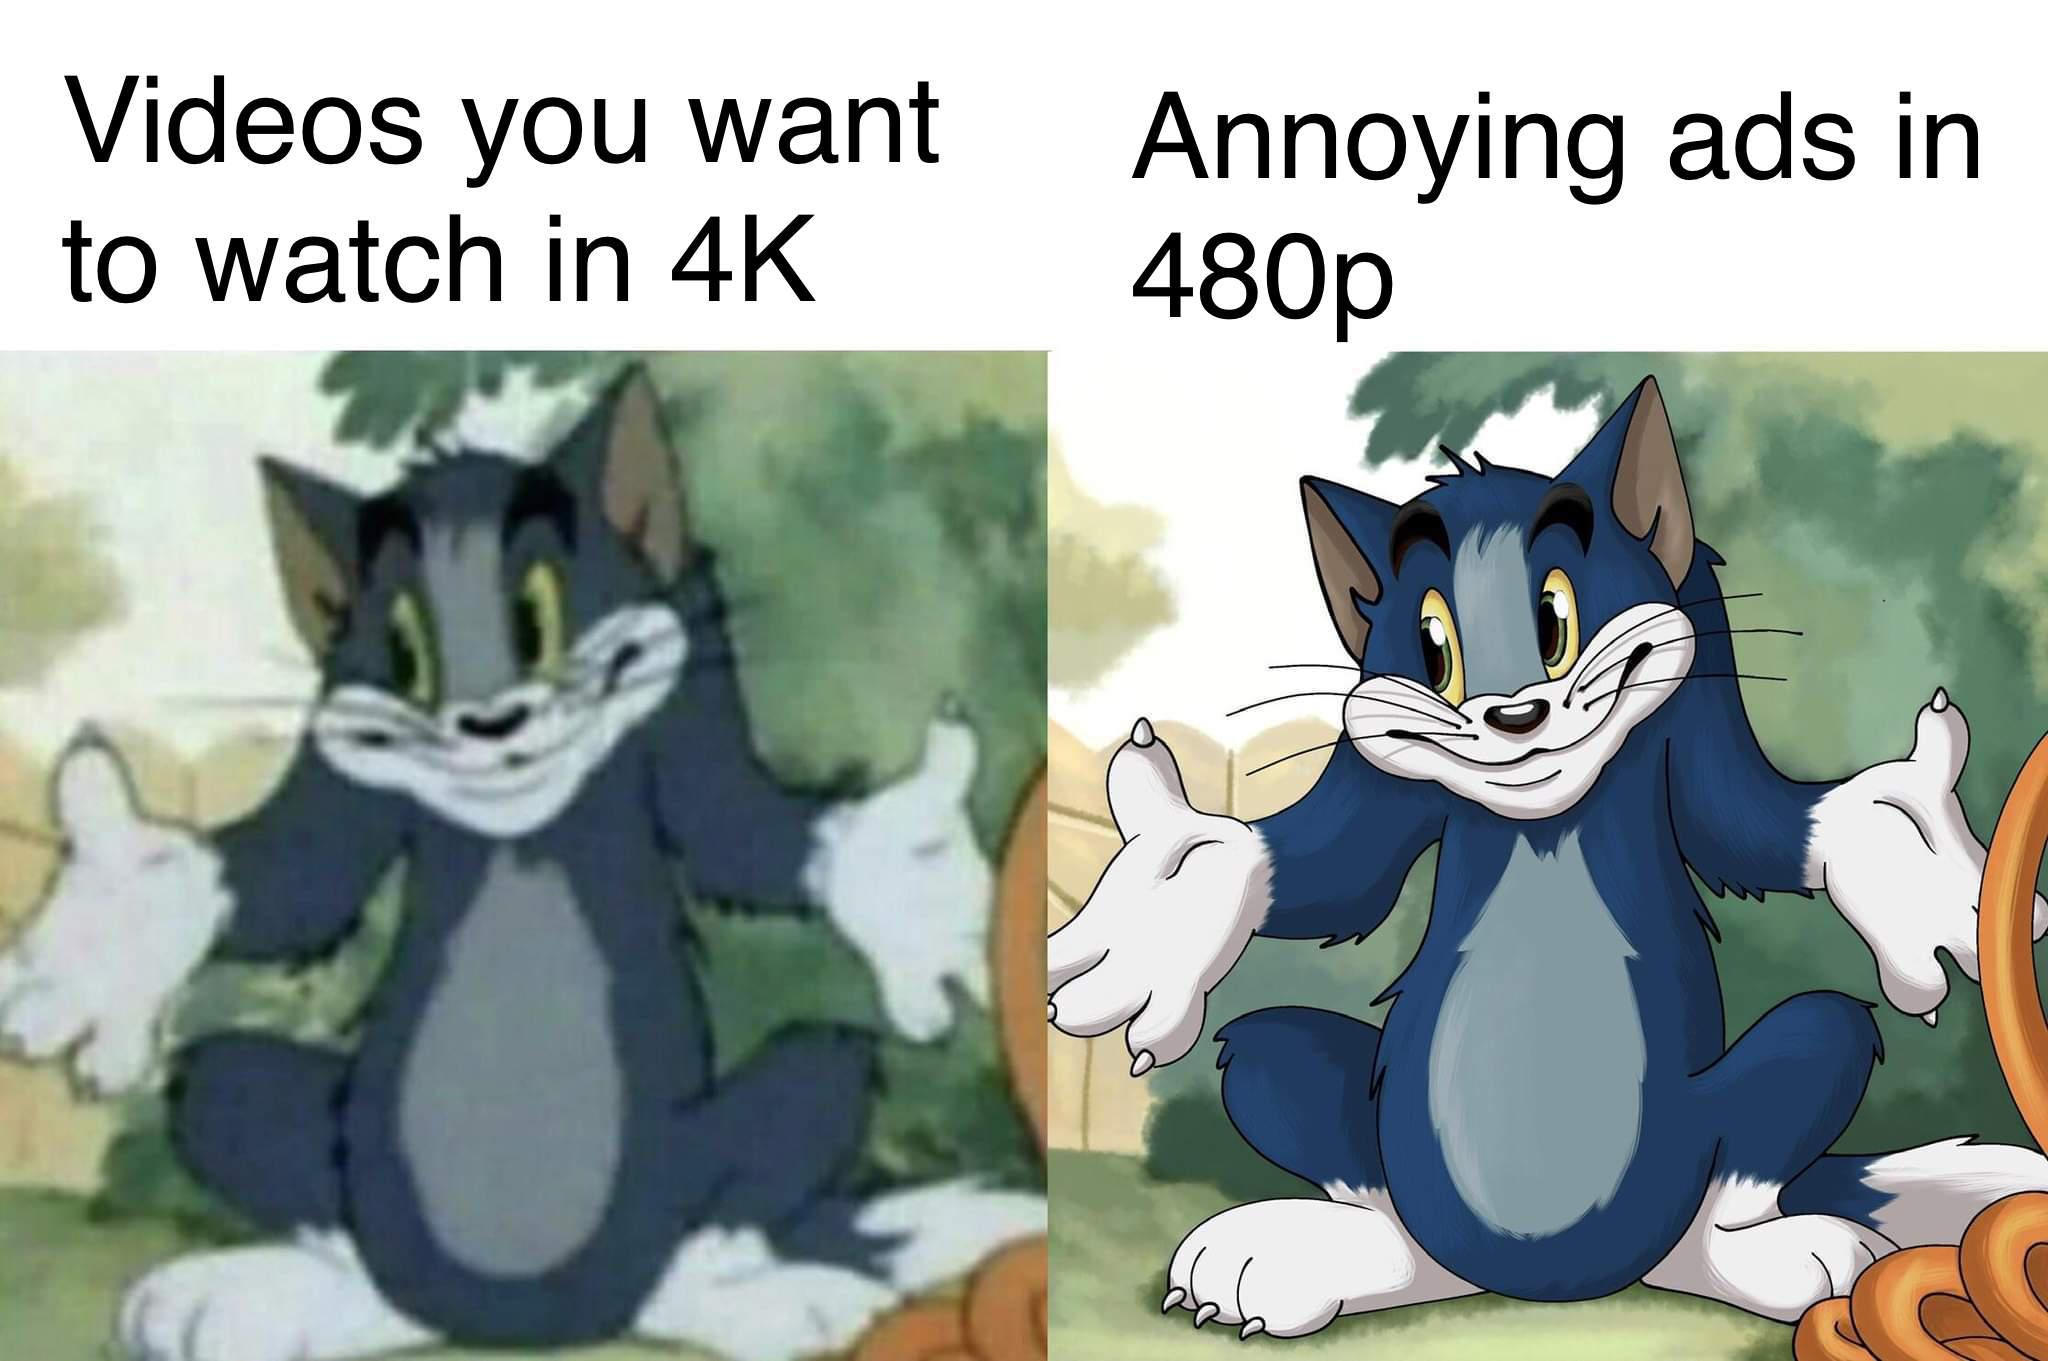 funny memes - tom y jerry meme - Videos you want to watch in 4K Annoying ads in 480p